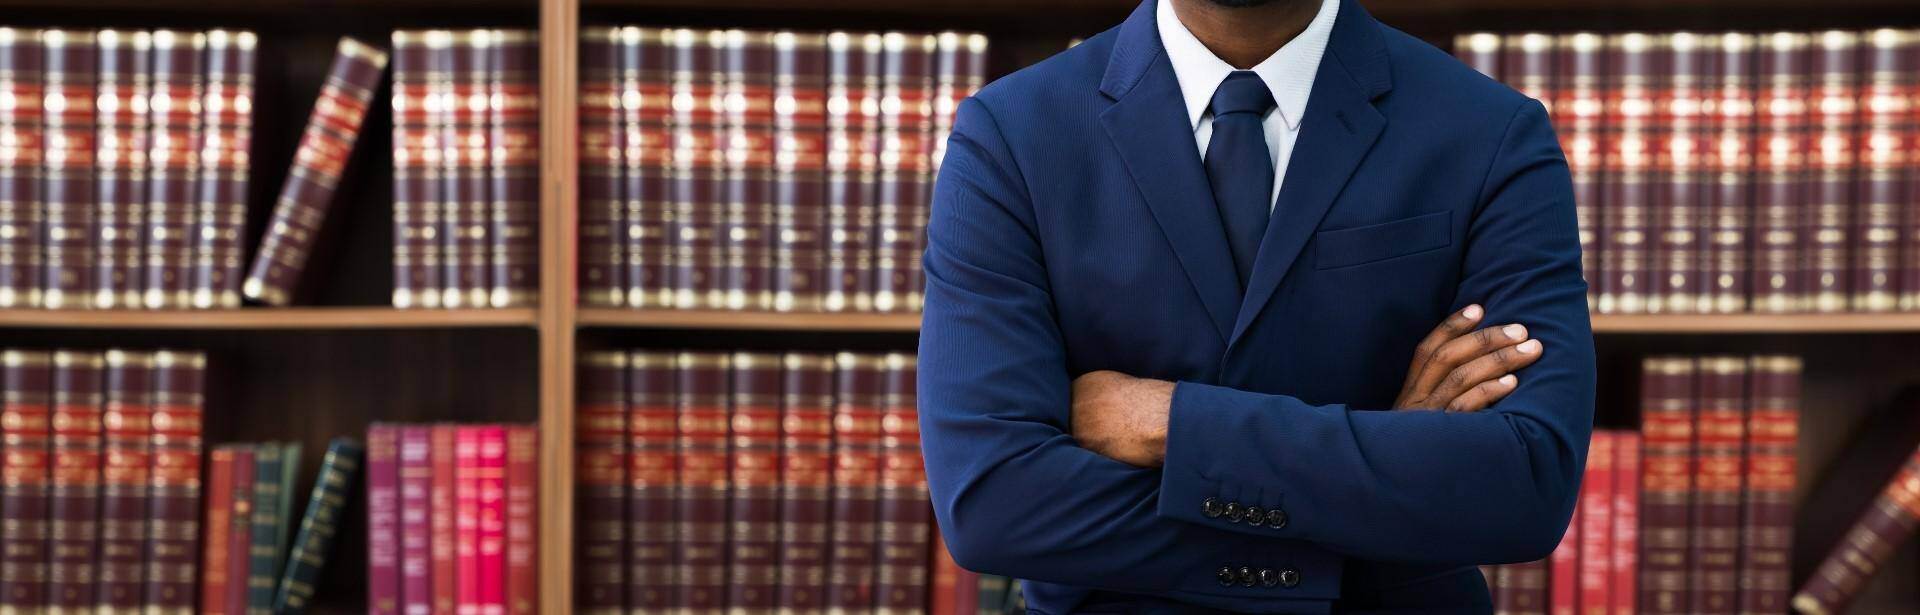 A black lawyer standing in front of a bookshelf of law book in Hinesville, Georgia